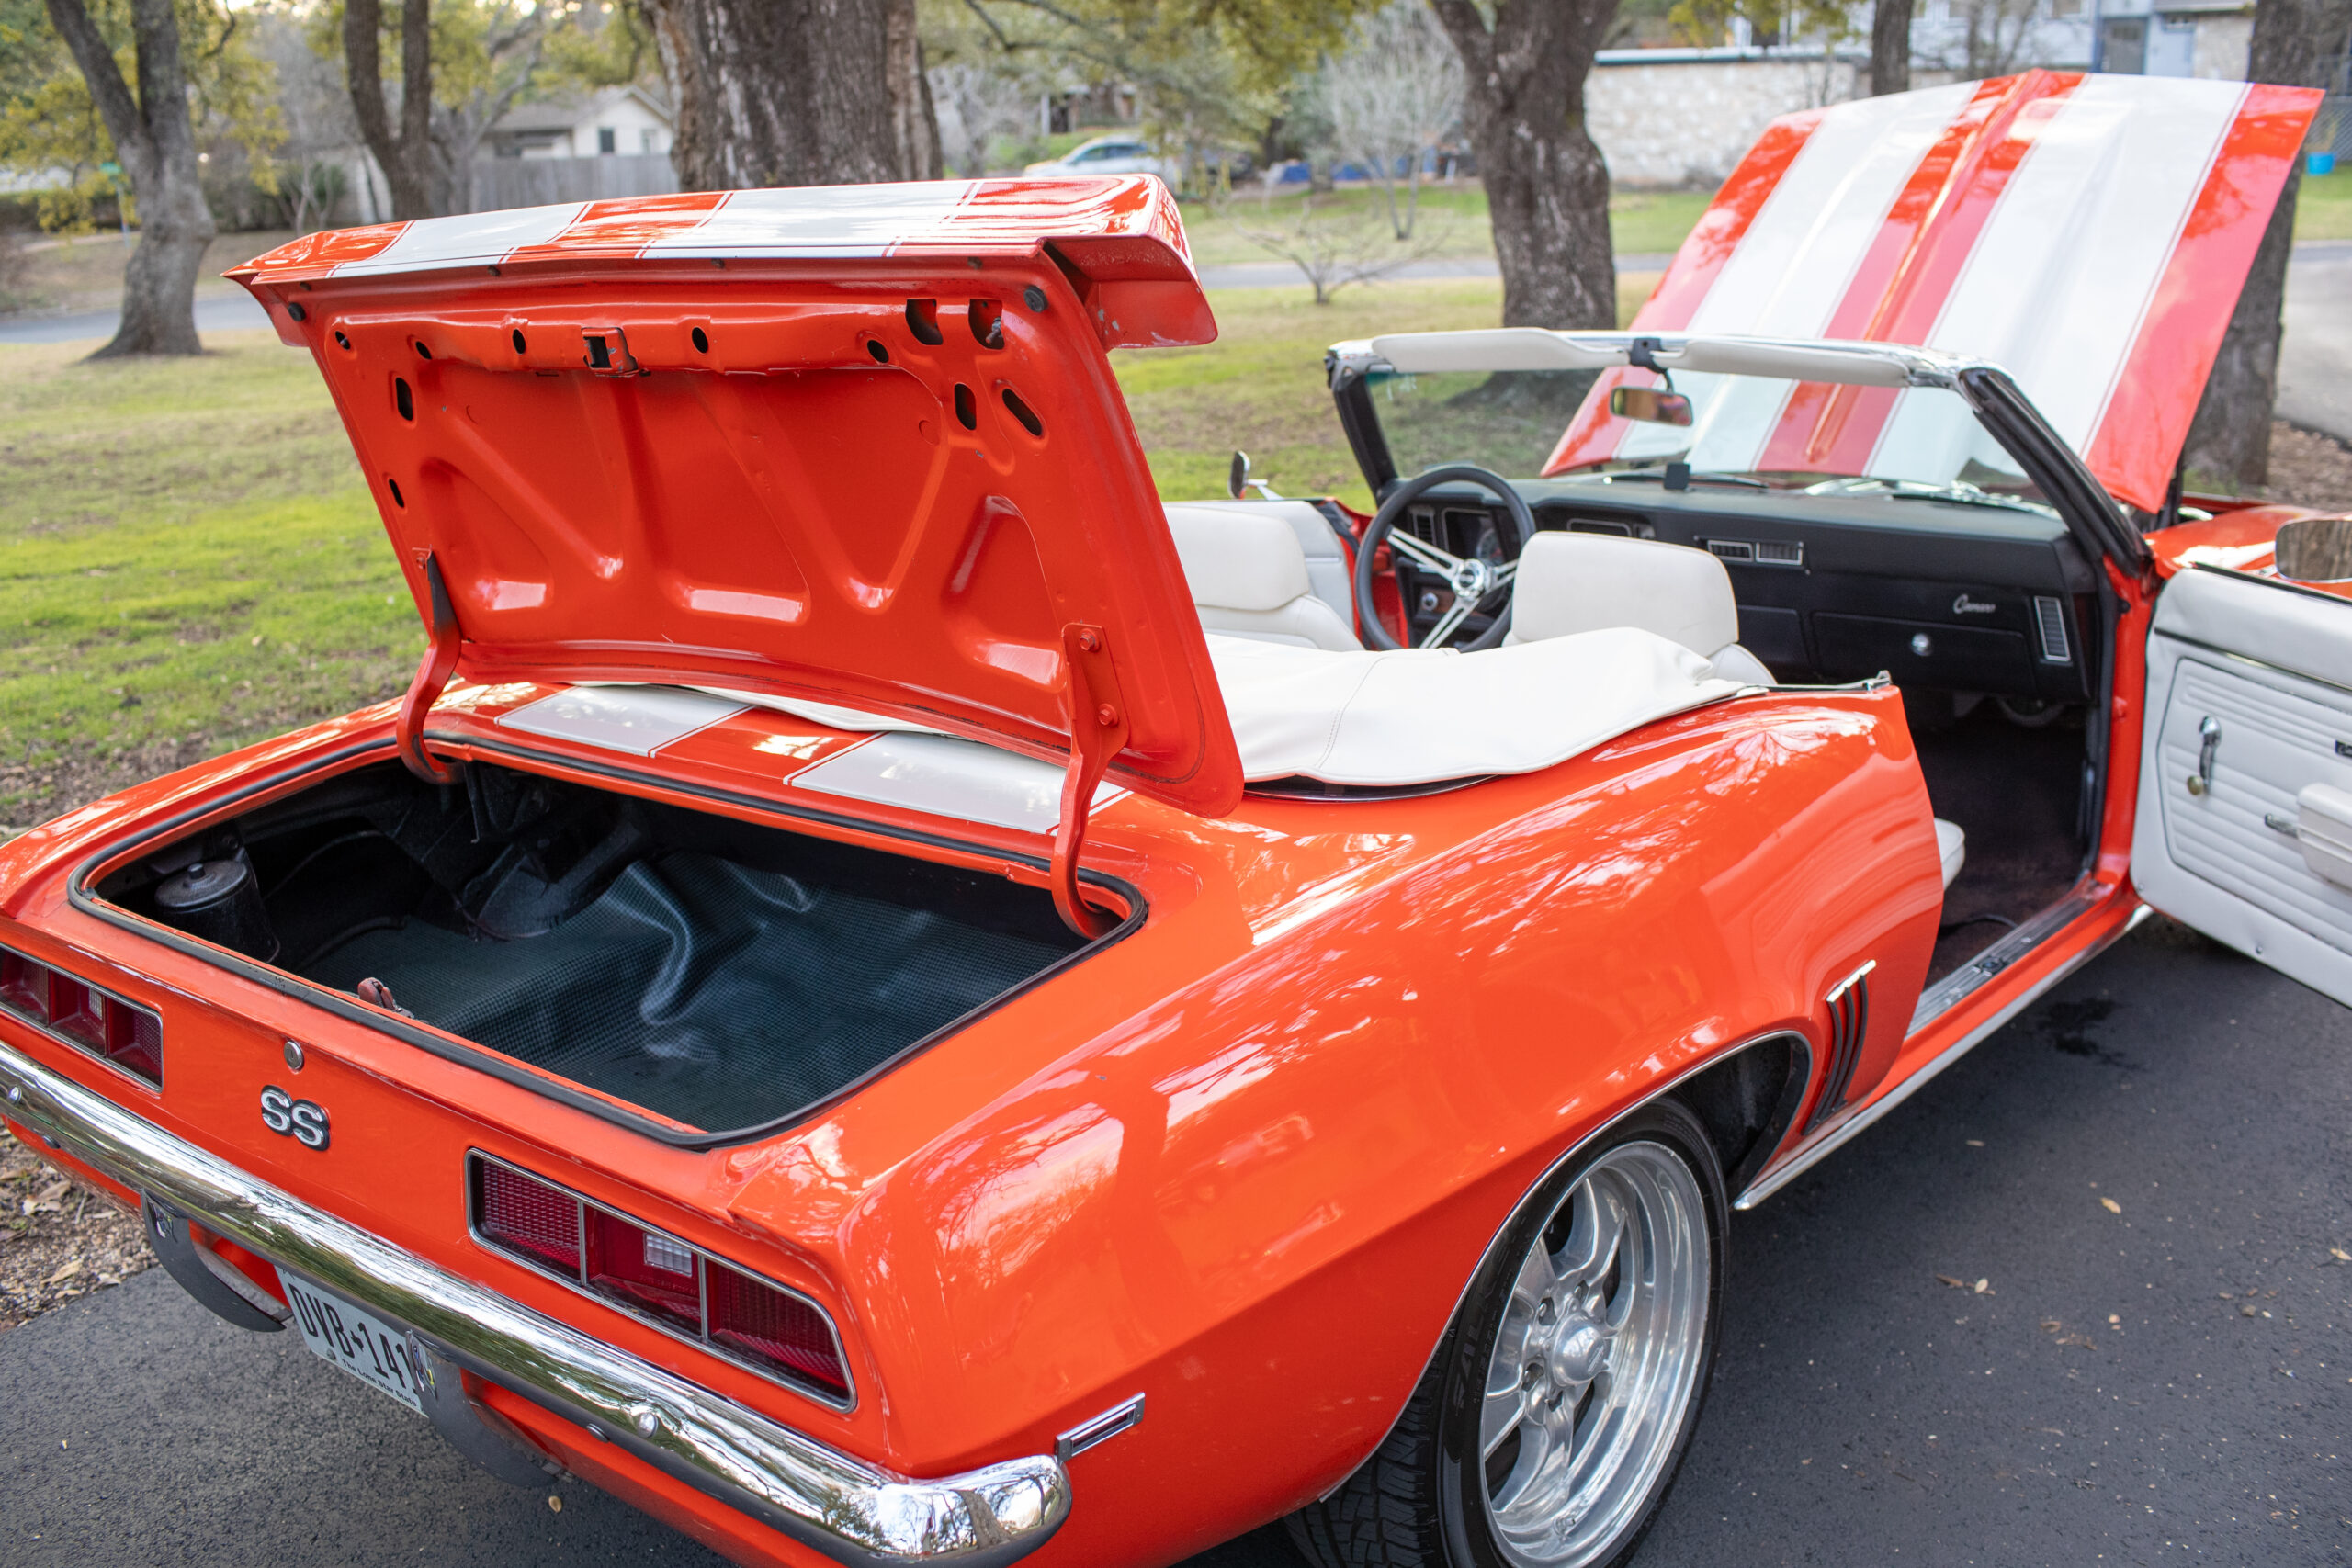 A classic orange convertible car with an open trunk and doors parked outdoors, featuring white racing stripes and a clean interior.